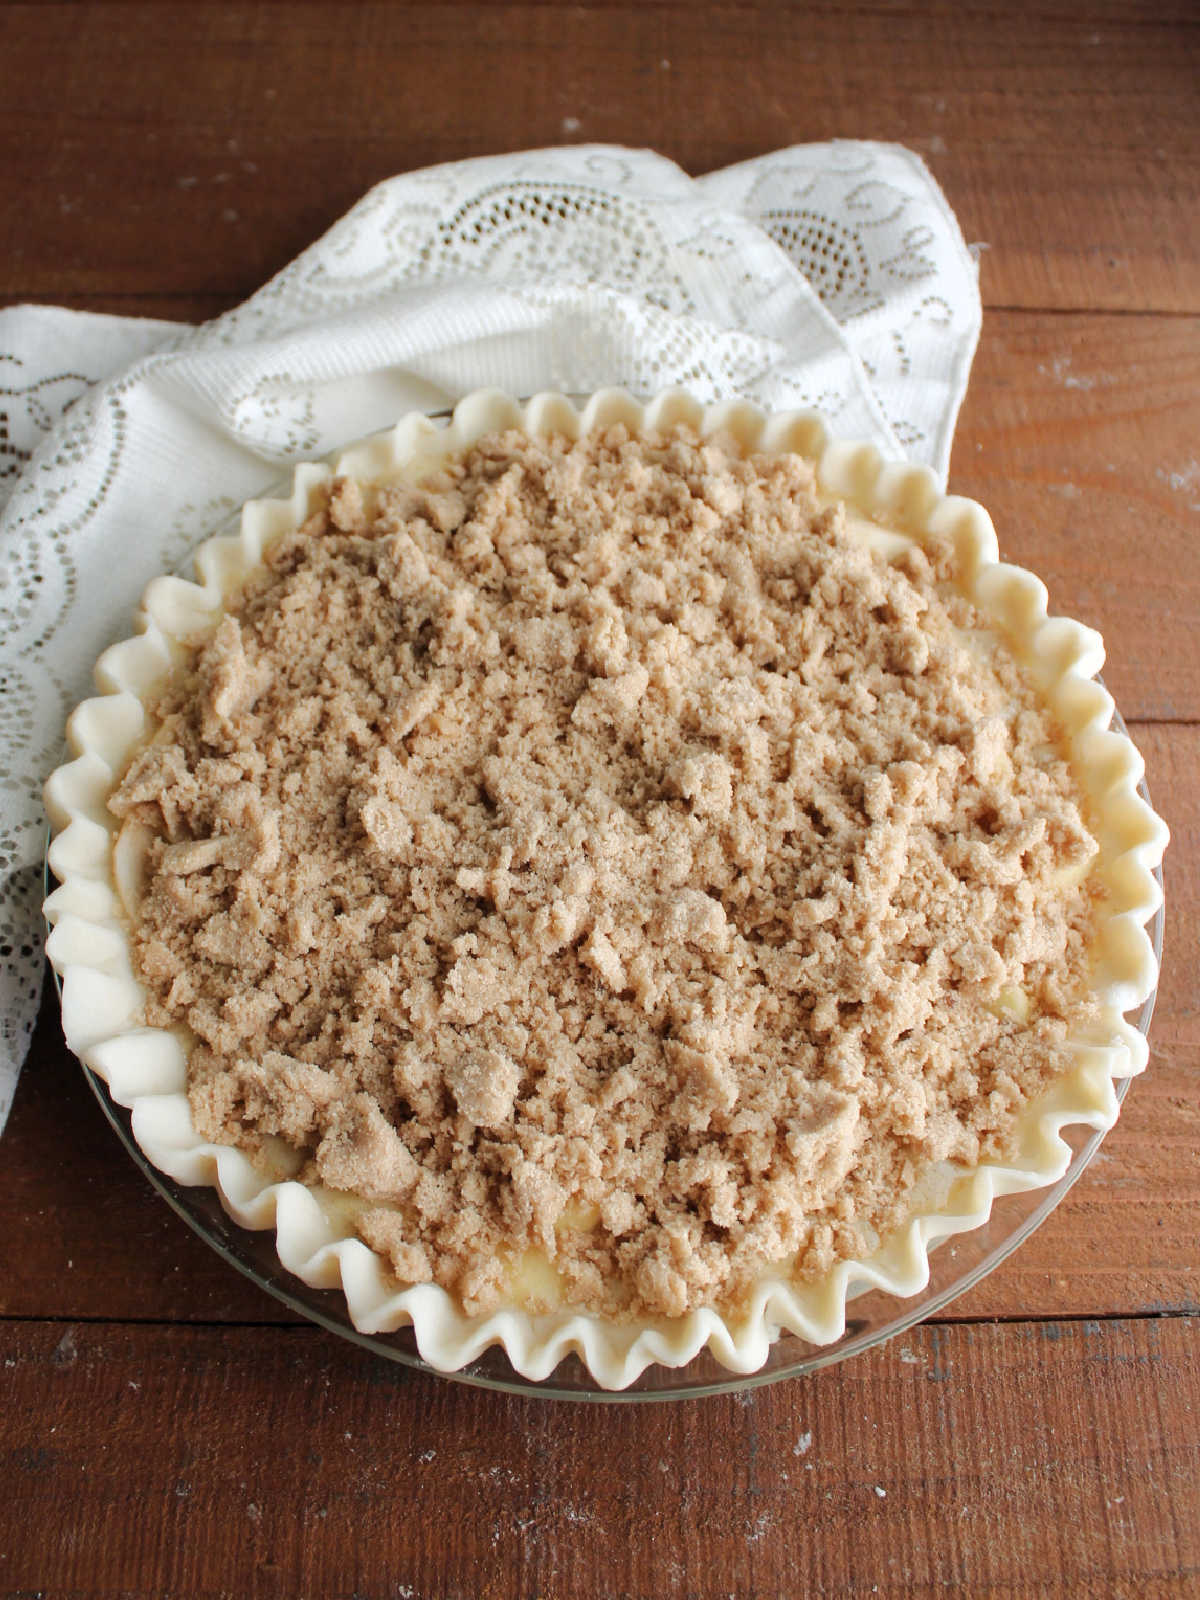 Pie covered in brown sugar streusel mixture, ready to go in the oven.